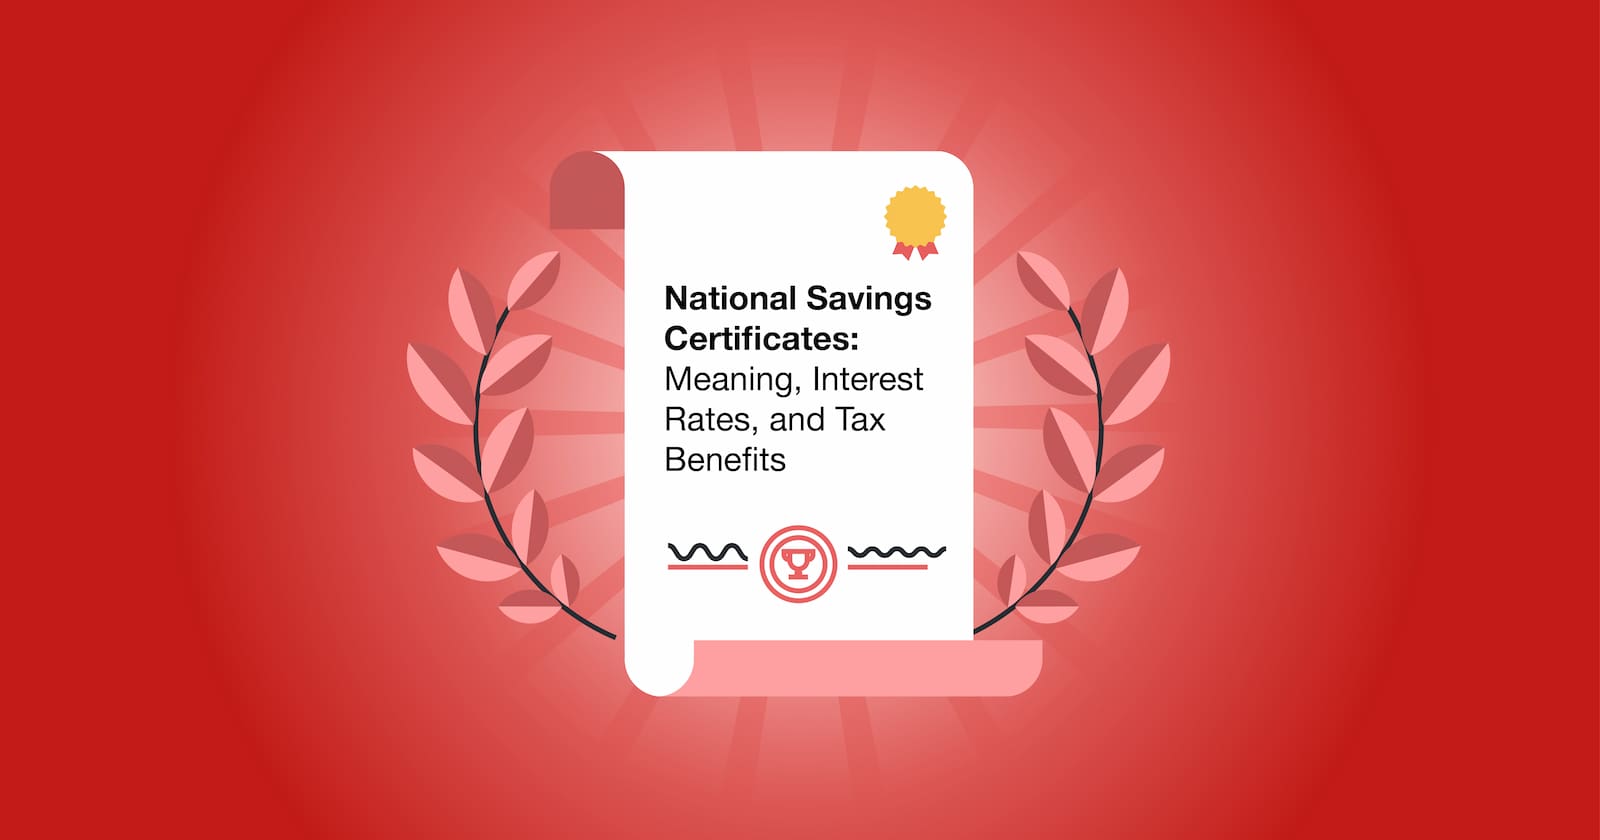 National Savings Certificates Meaning, Interest Rates, and Tax Benefits